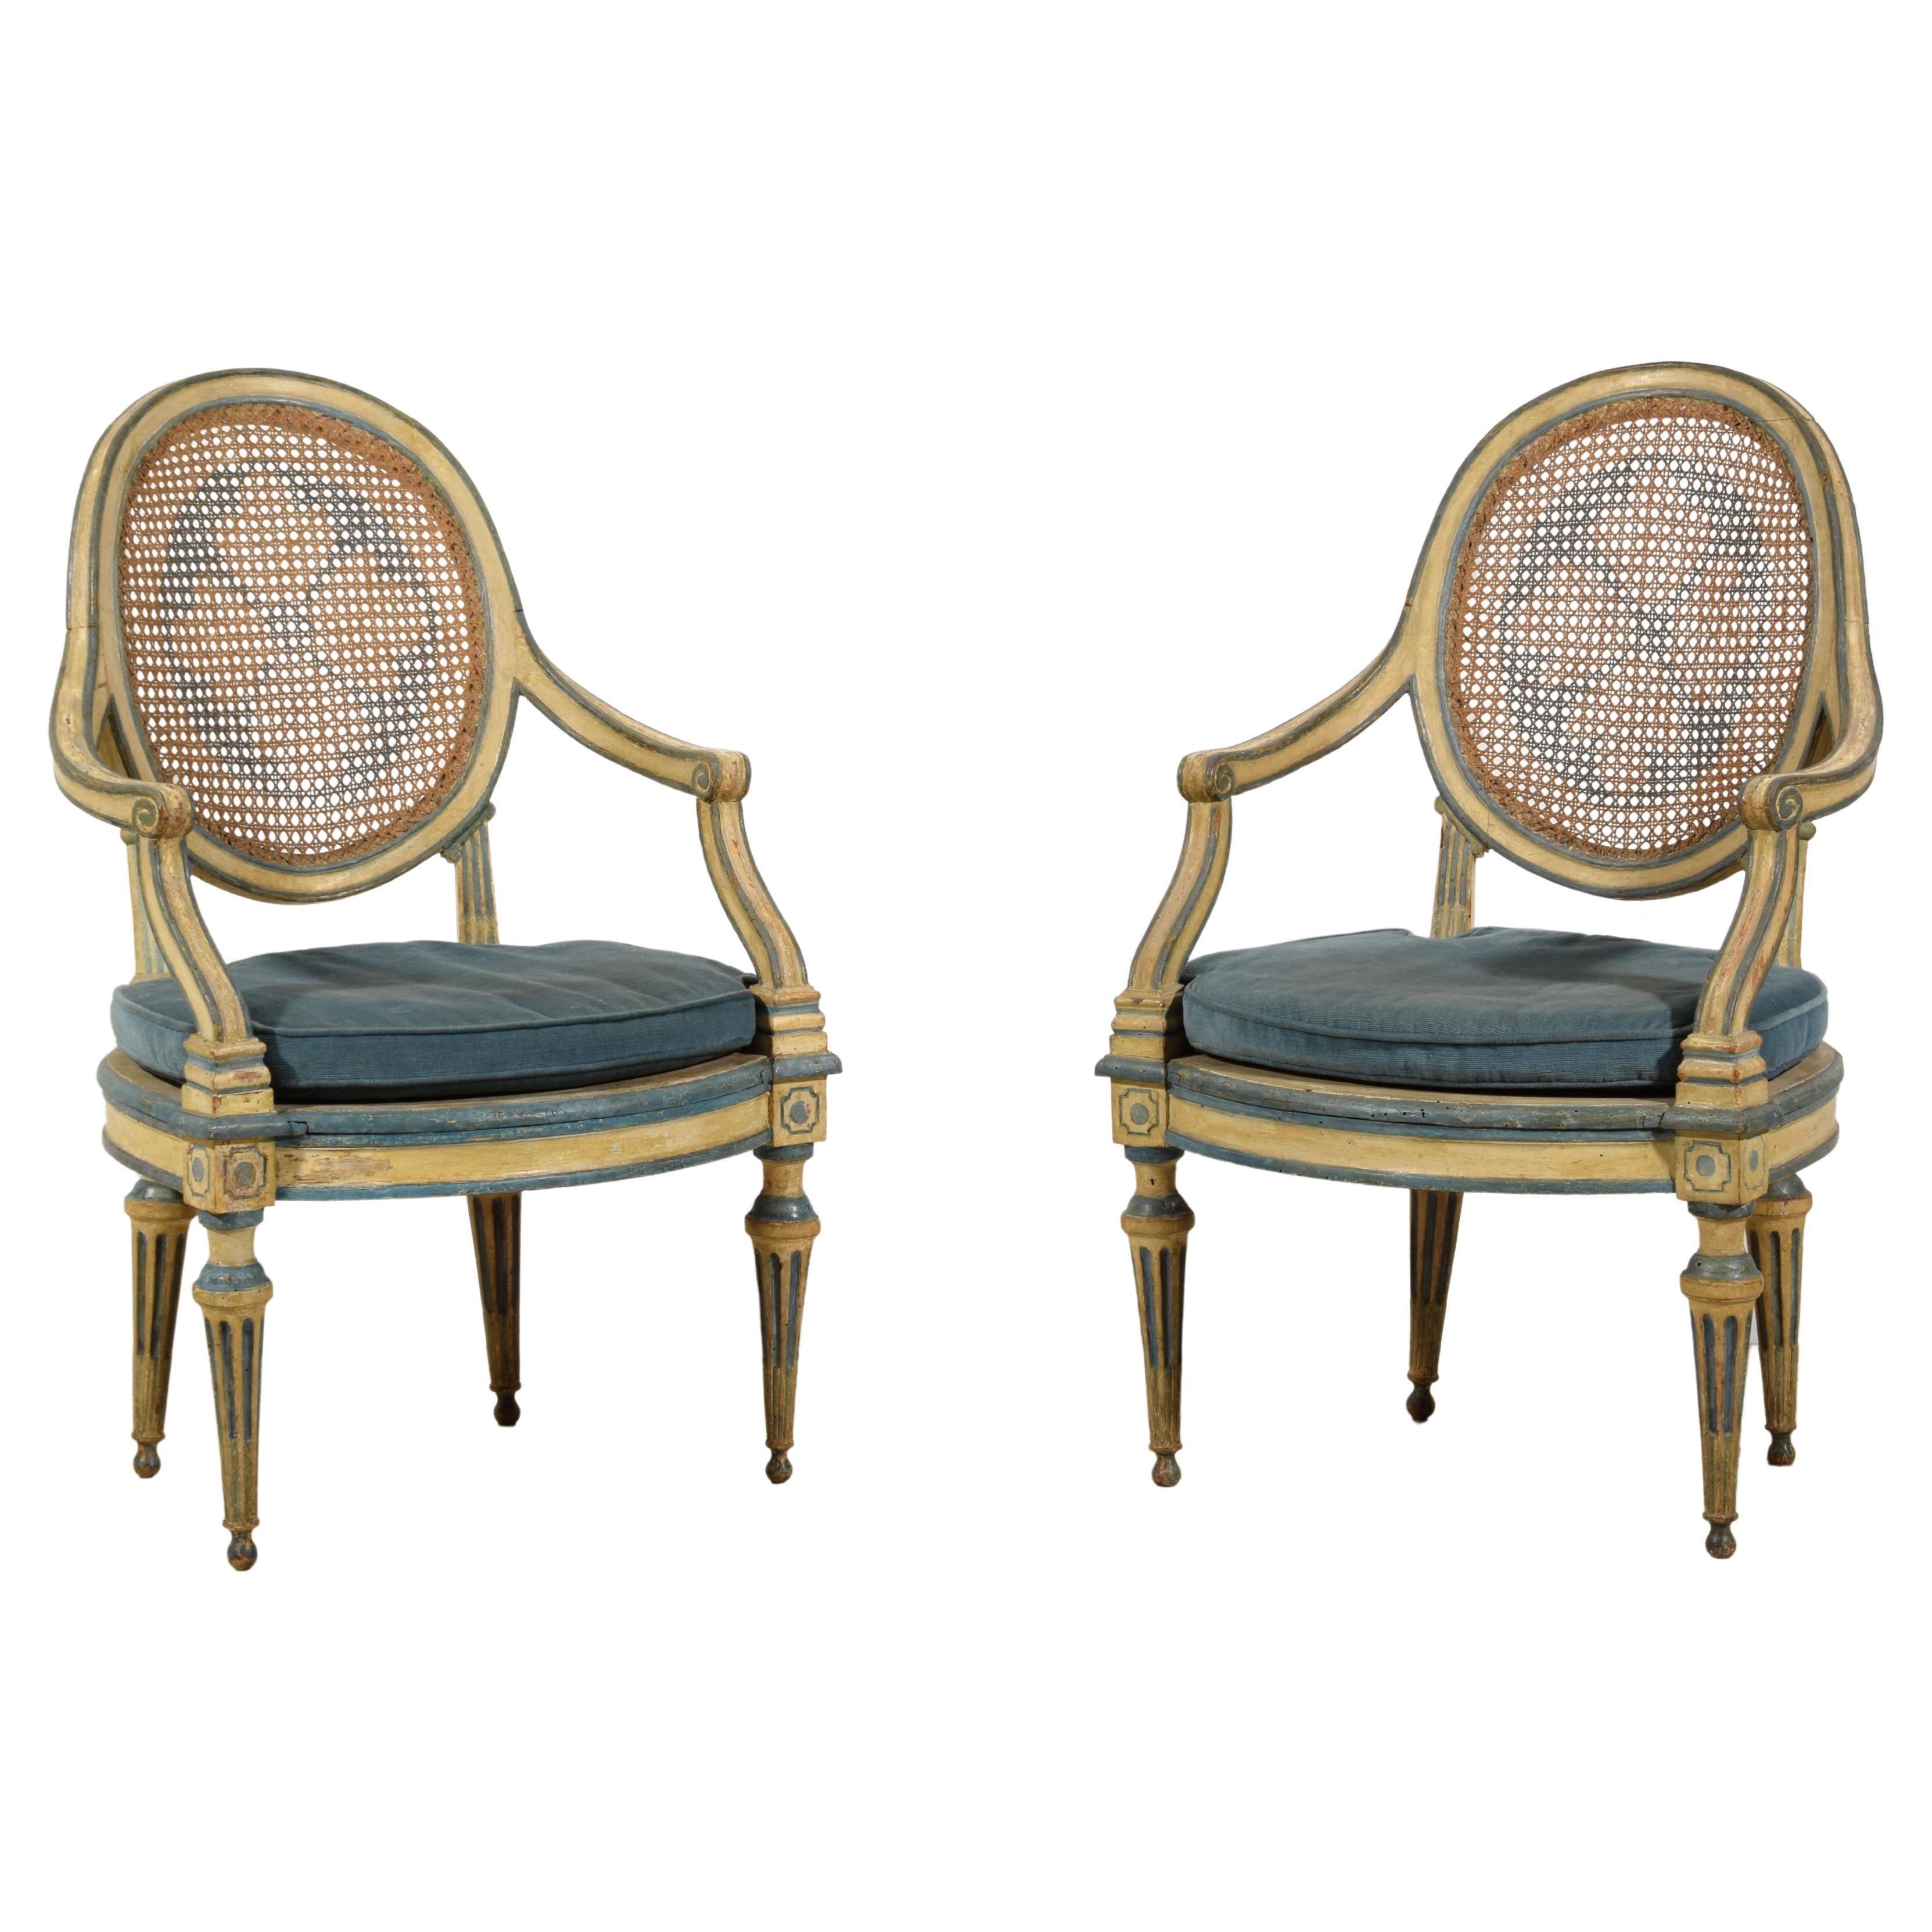 18th Century Pair of Italian Neoclassical Lacquered Wood Armchairs For Sale